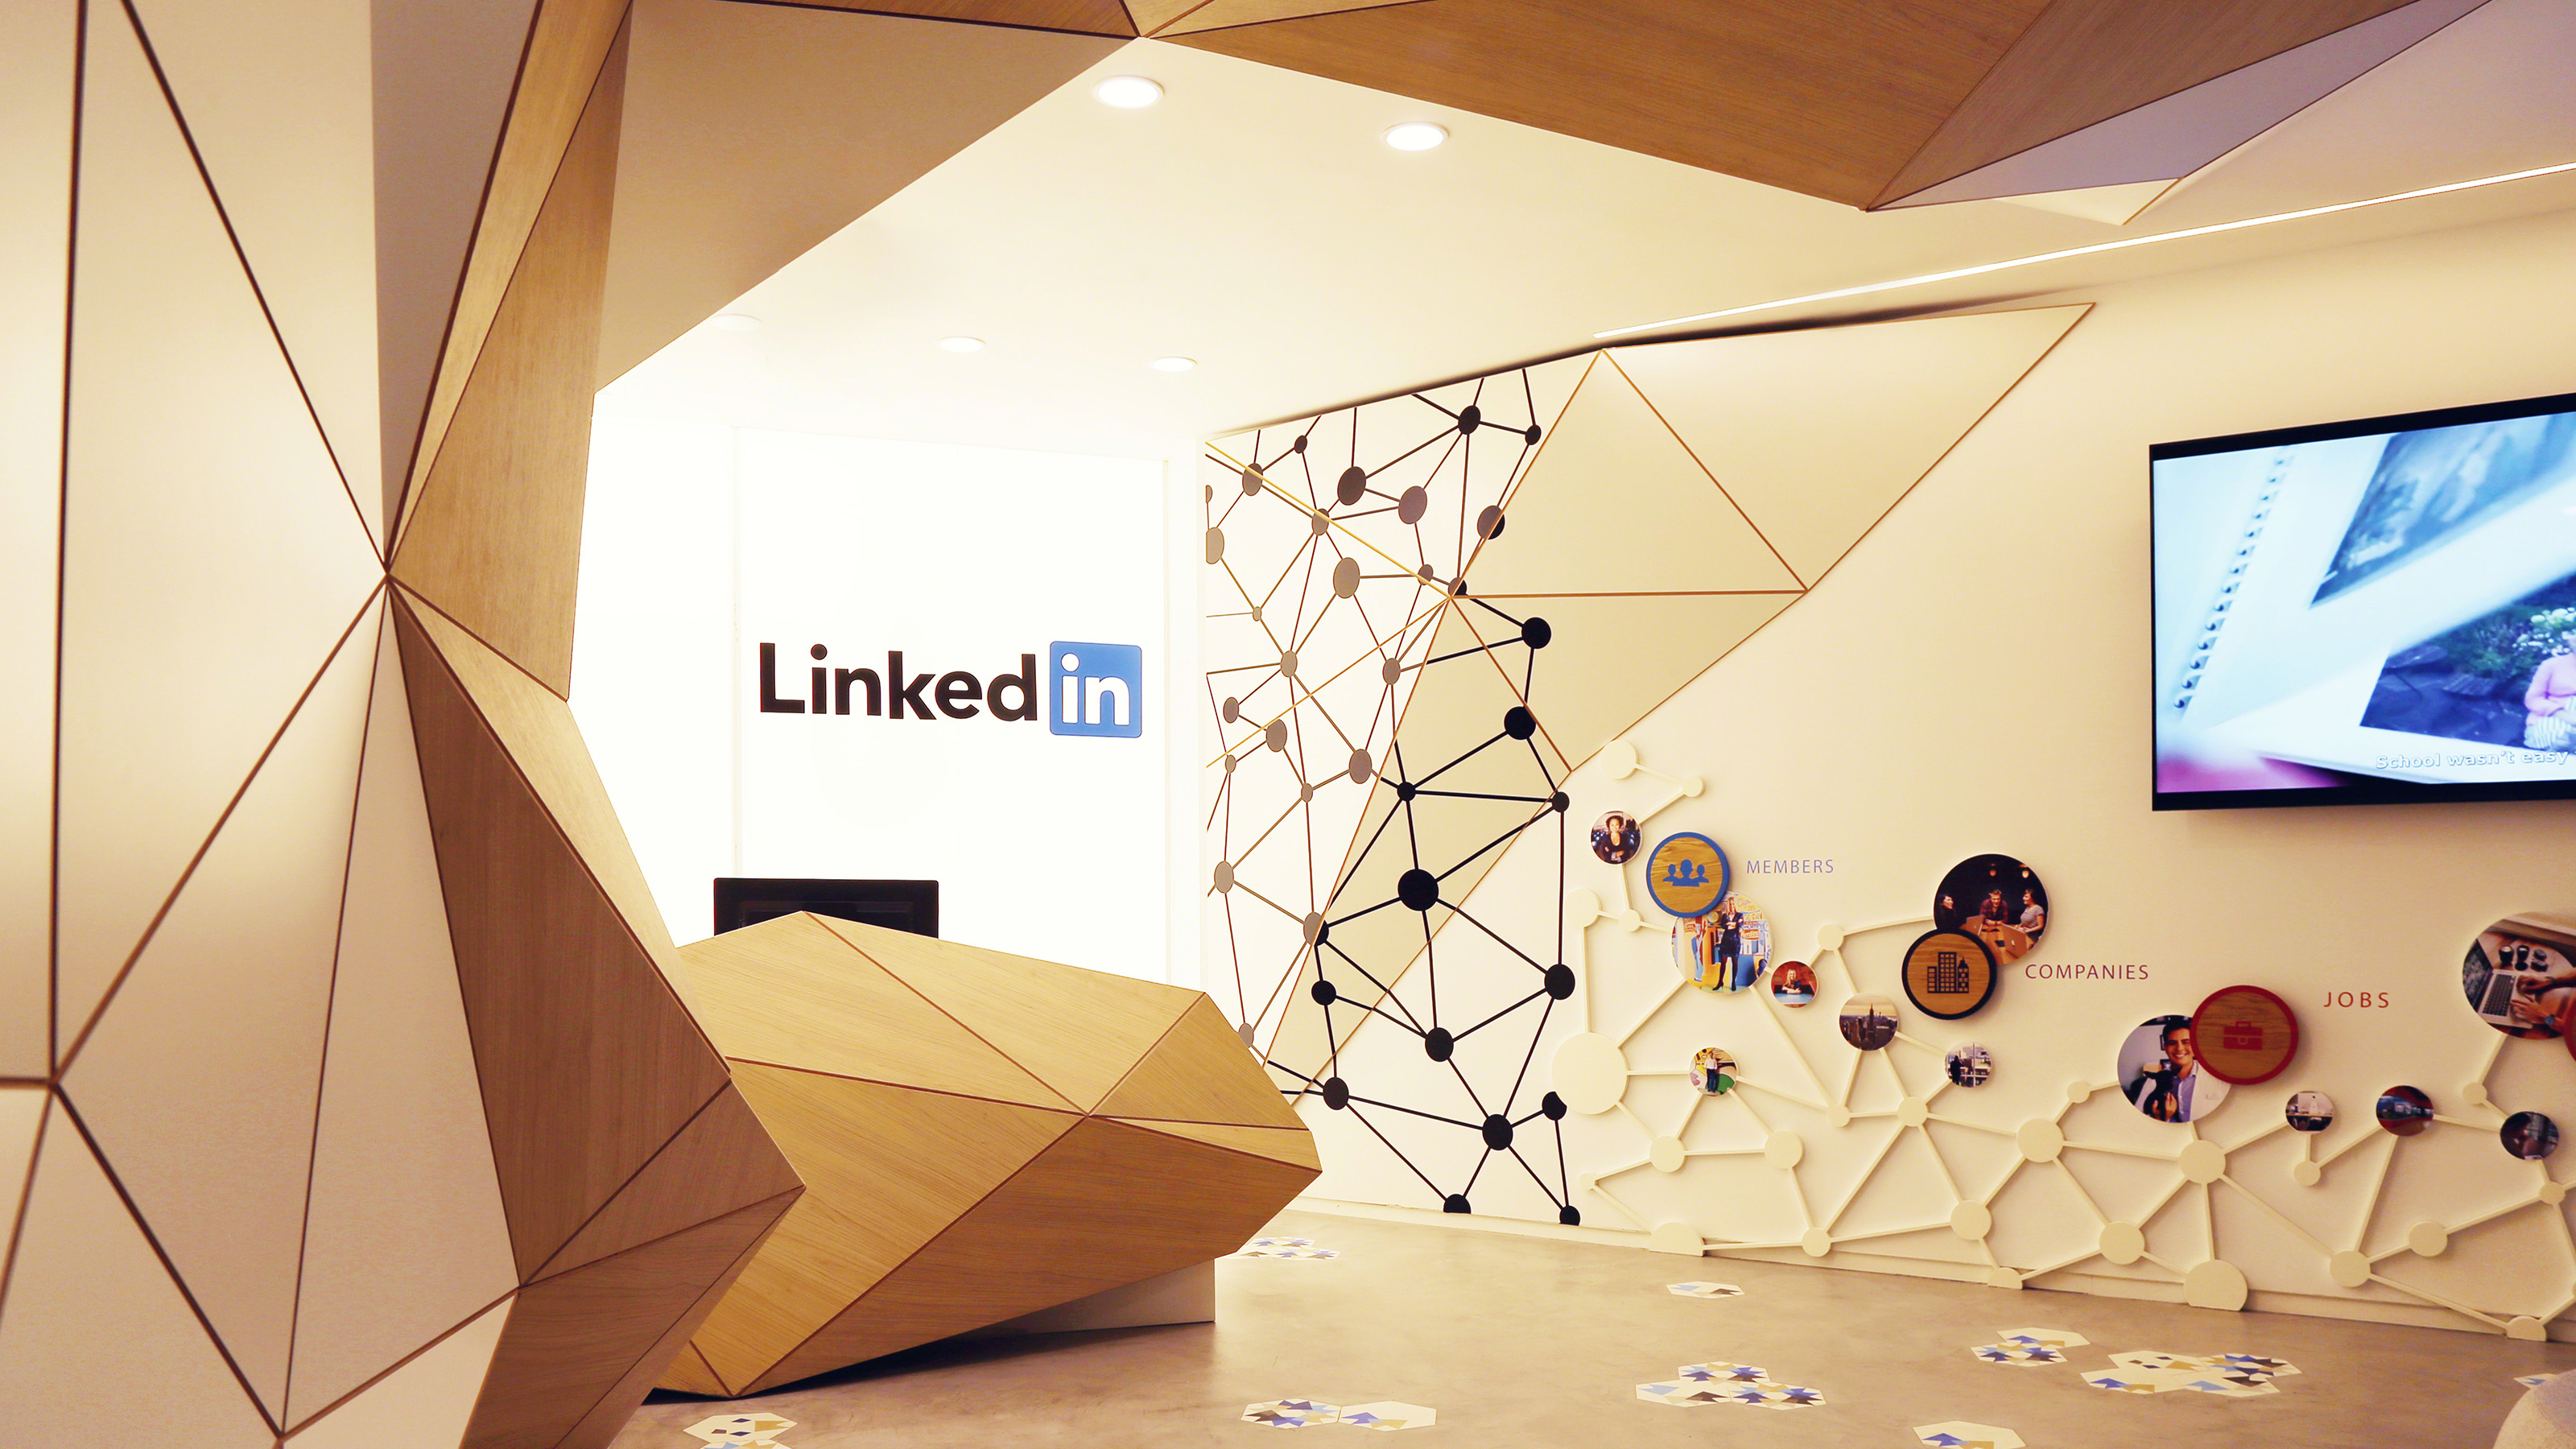 Moder Linkedin office with floor and walls made of wood